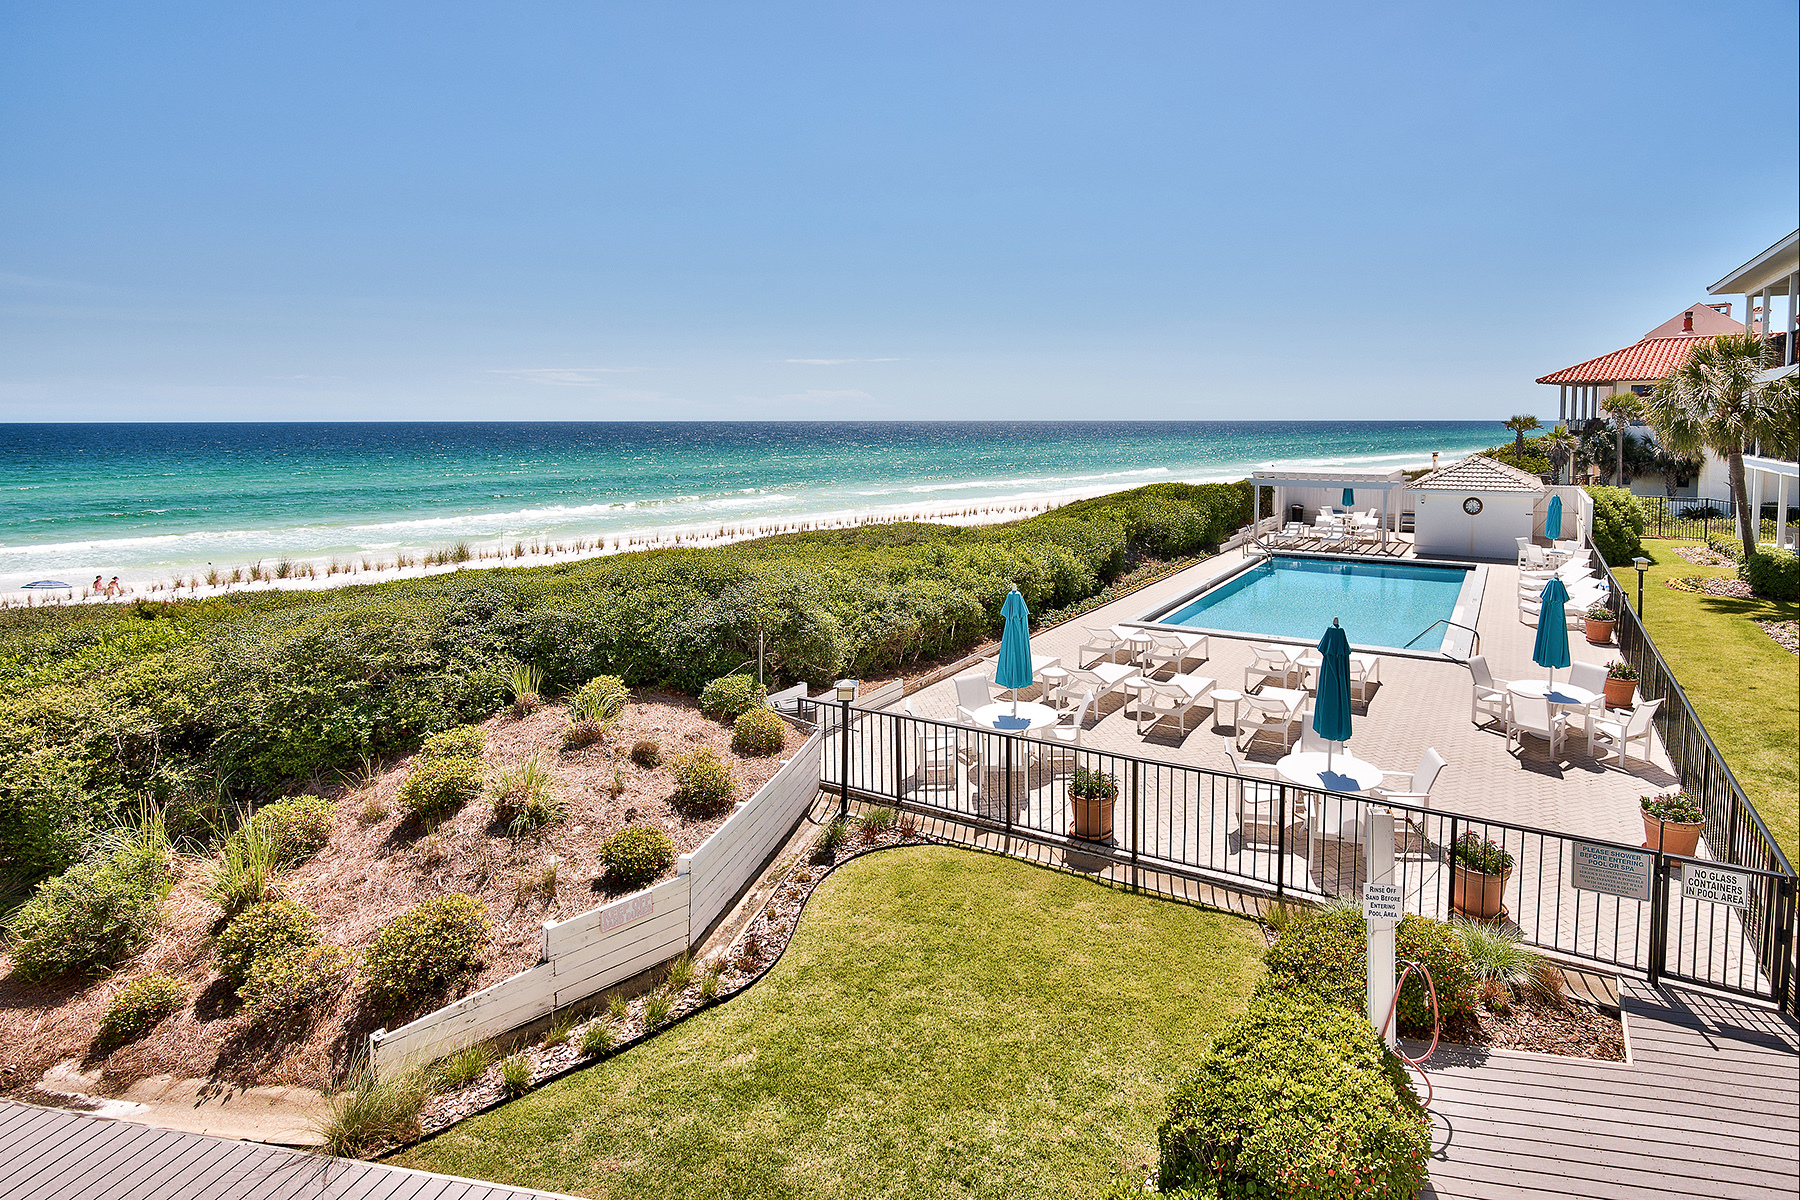 A Gulf front view from one of the landscaped lawns in Dune Allen and neighboring swimming pool